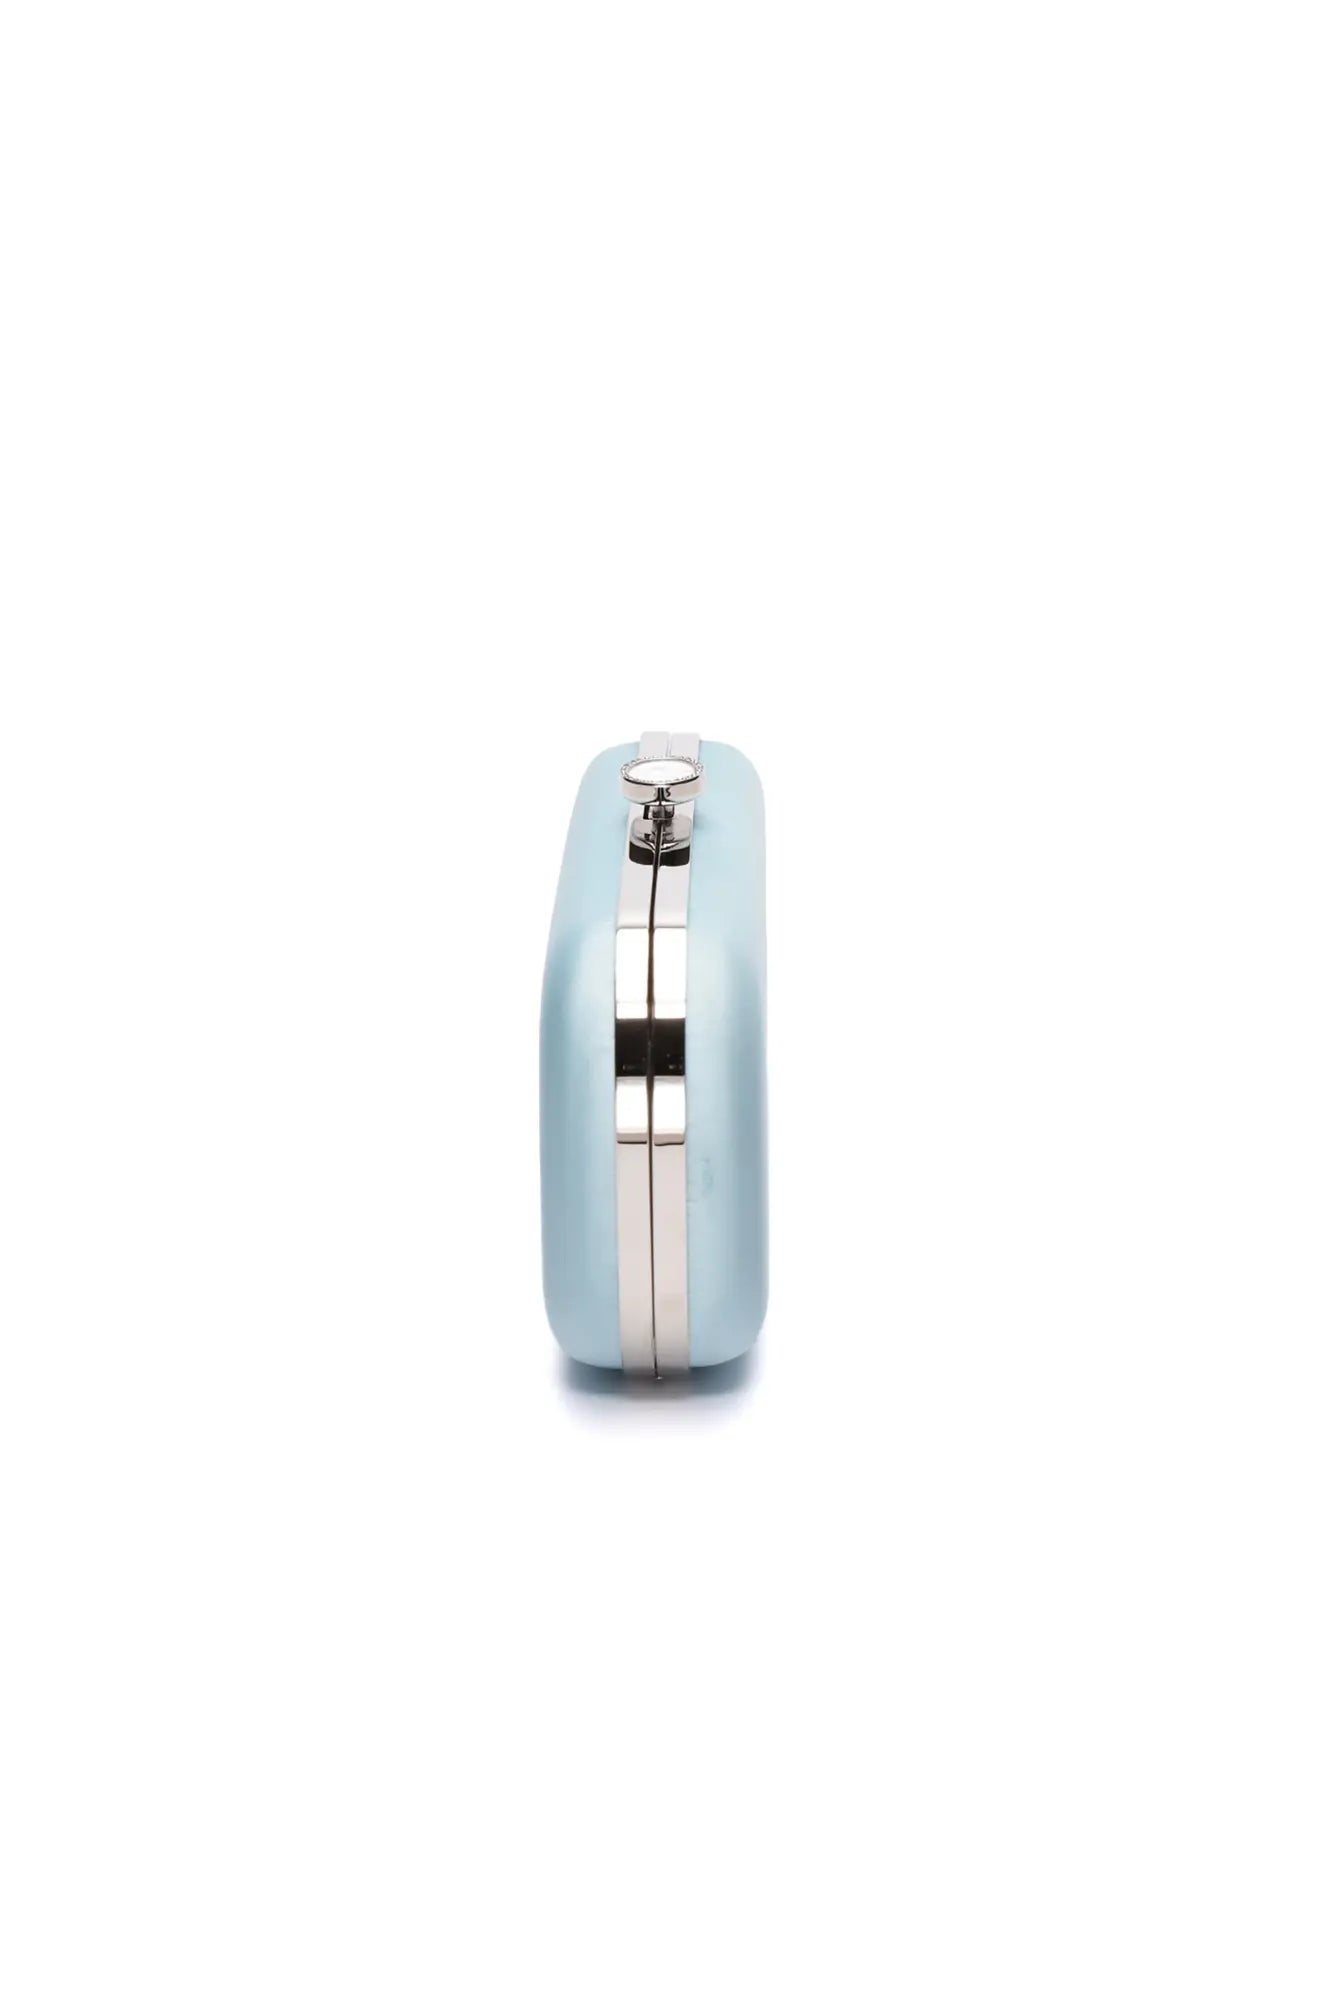 Bella Clutch Cinderella Blue Grande cylindrical container with metallic clasp isolated on white background. Brand name: The Bella Rosa Collection